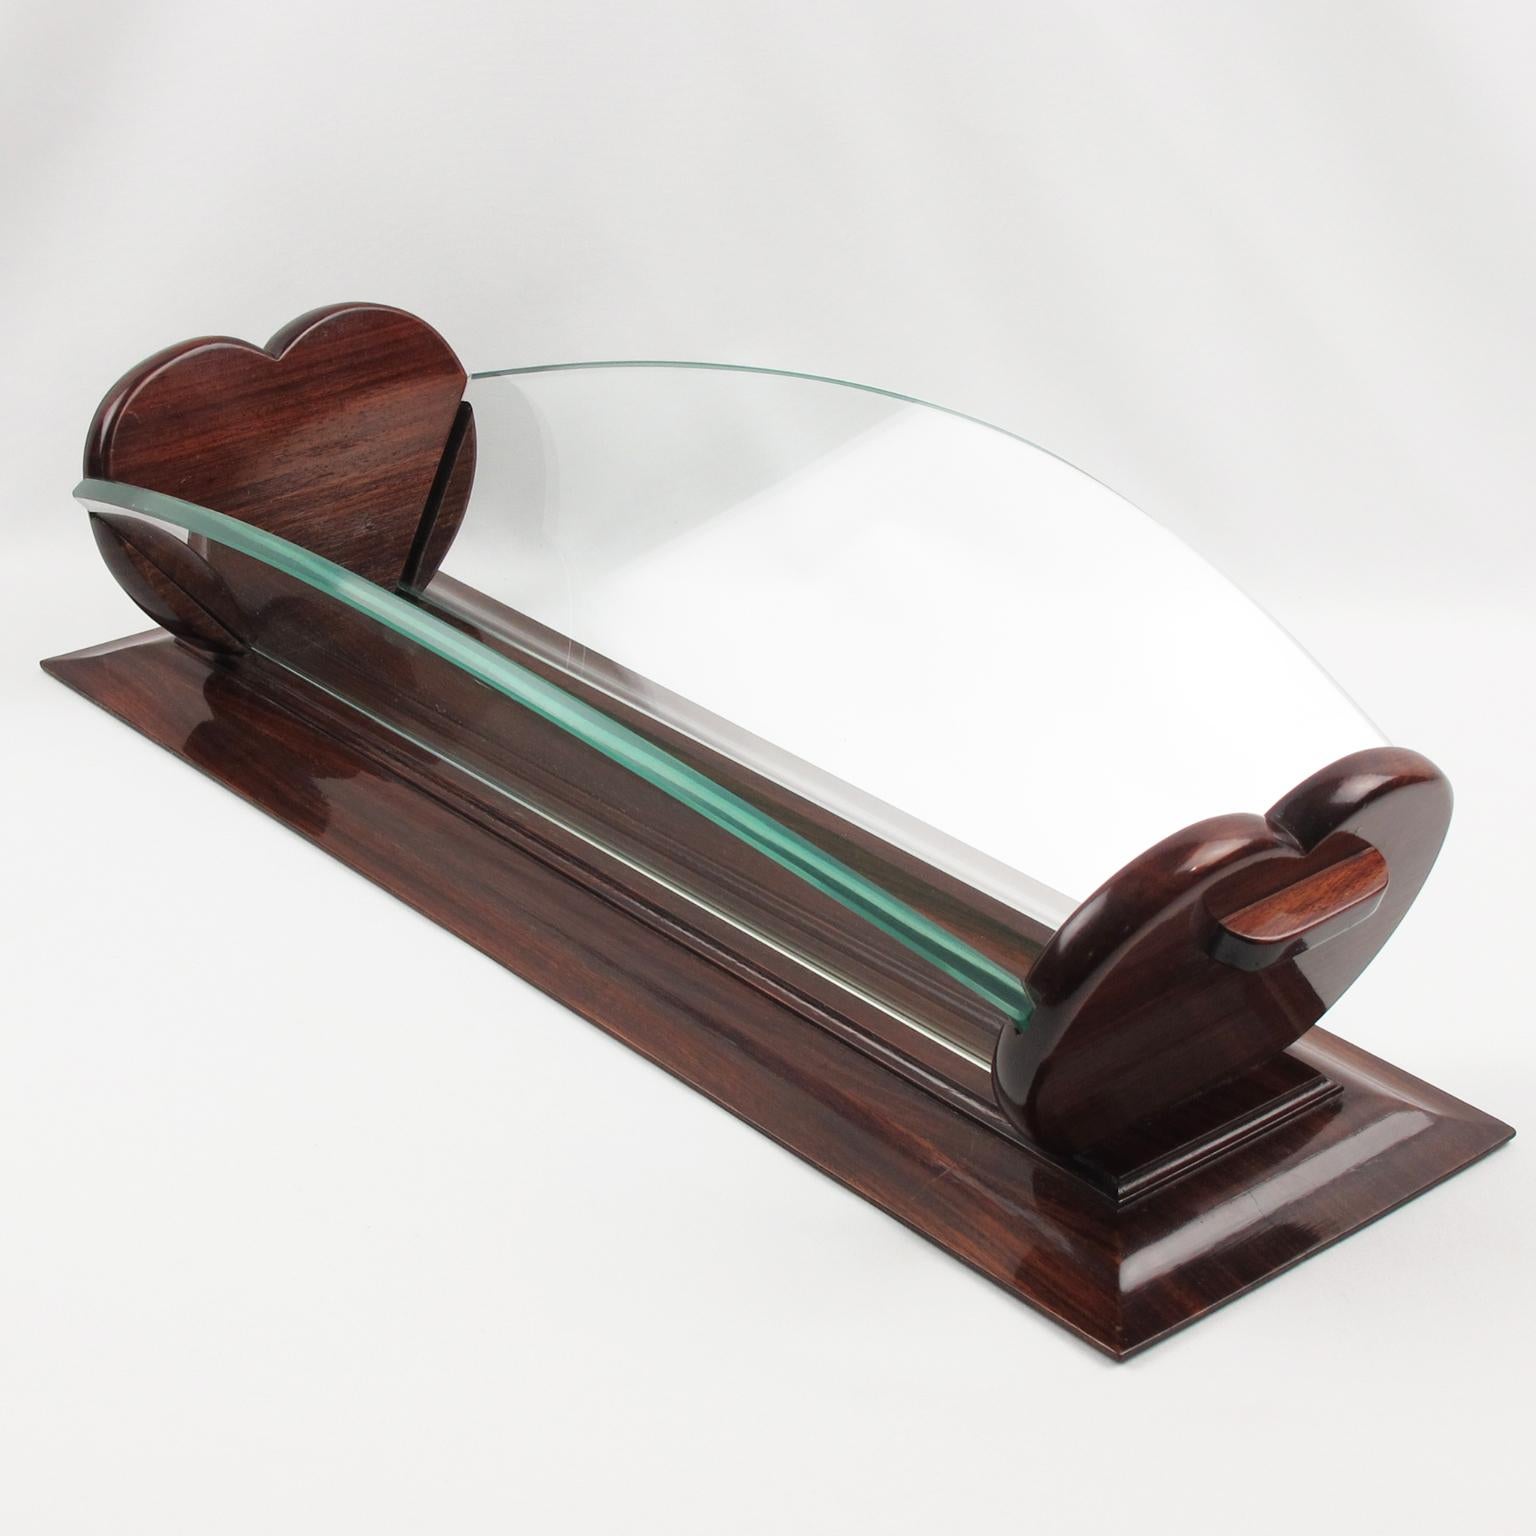 This beautiful Art Deco massive centerpiece, decorative bowl, or serving fruit or bread basket was hand-crafted in France in the 1930s. The varnished wood base has a stunning heart-shaped carved design on the sides. Two shaped transparent glass